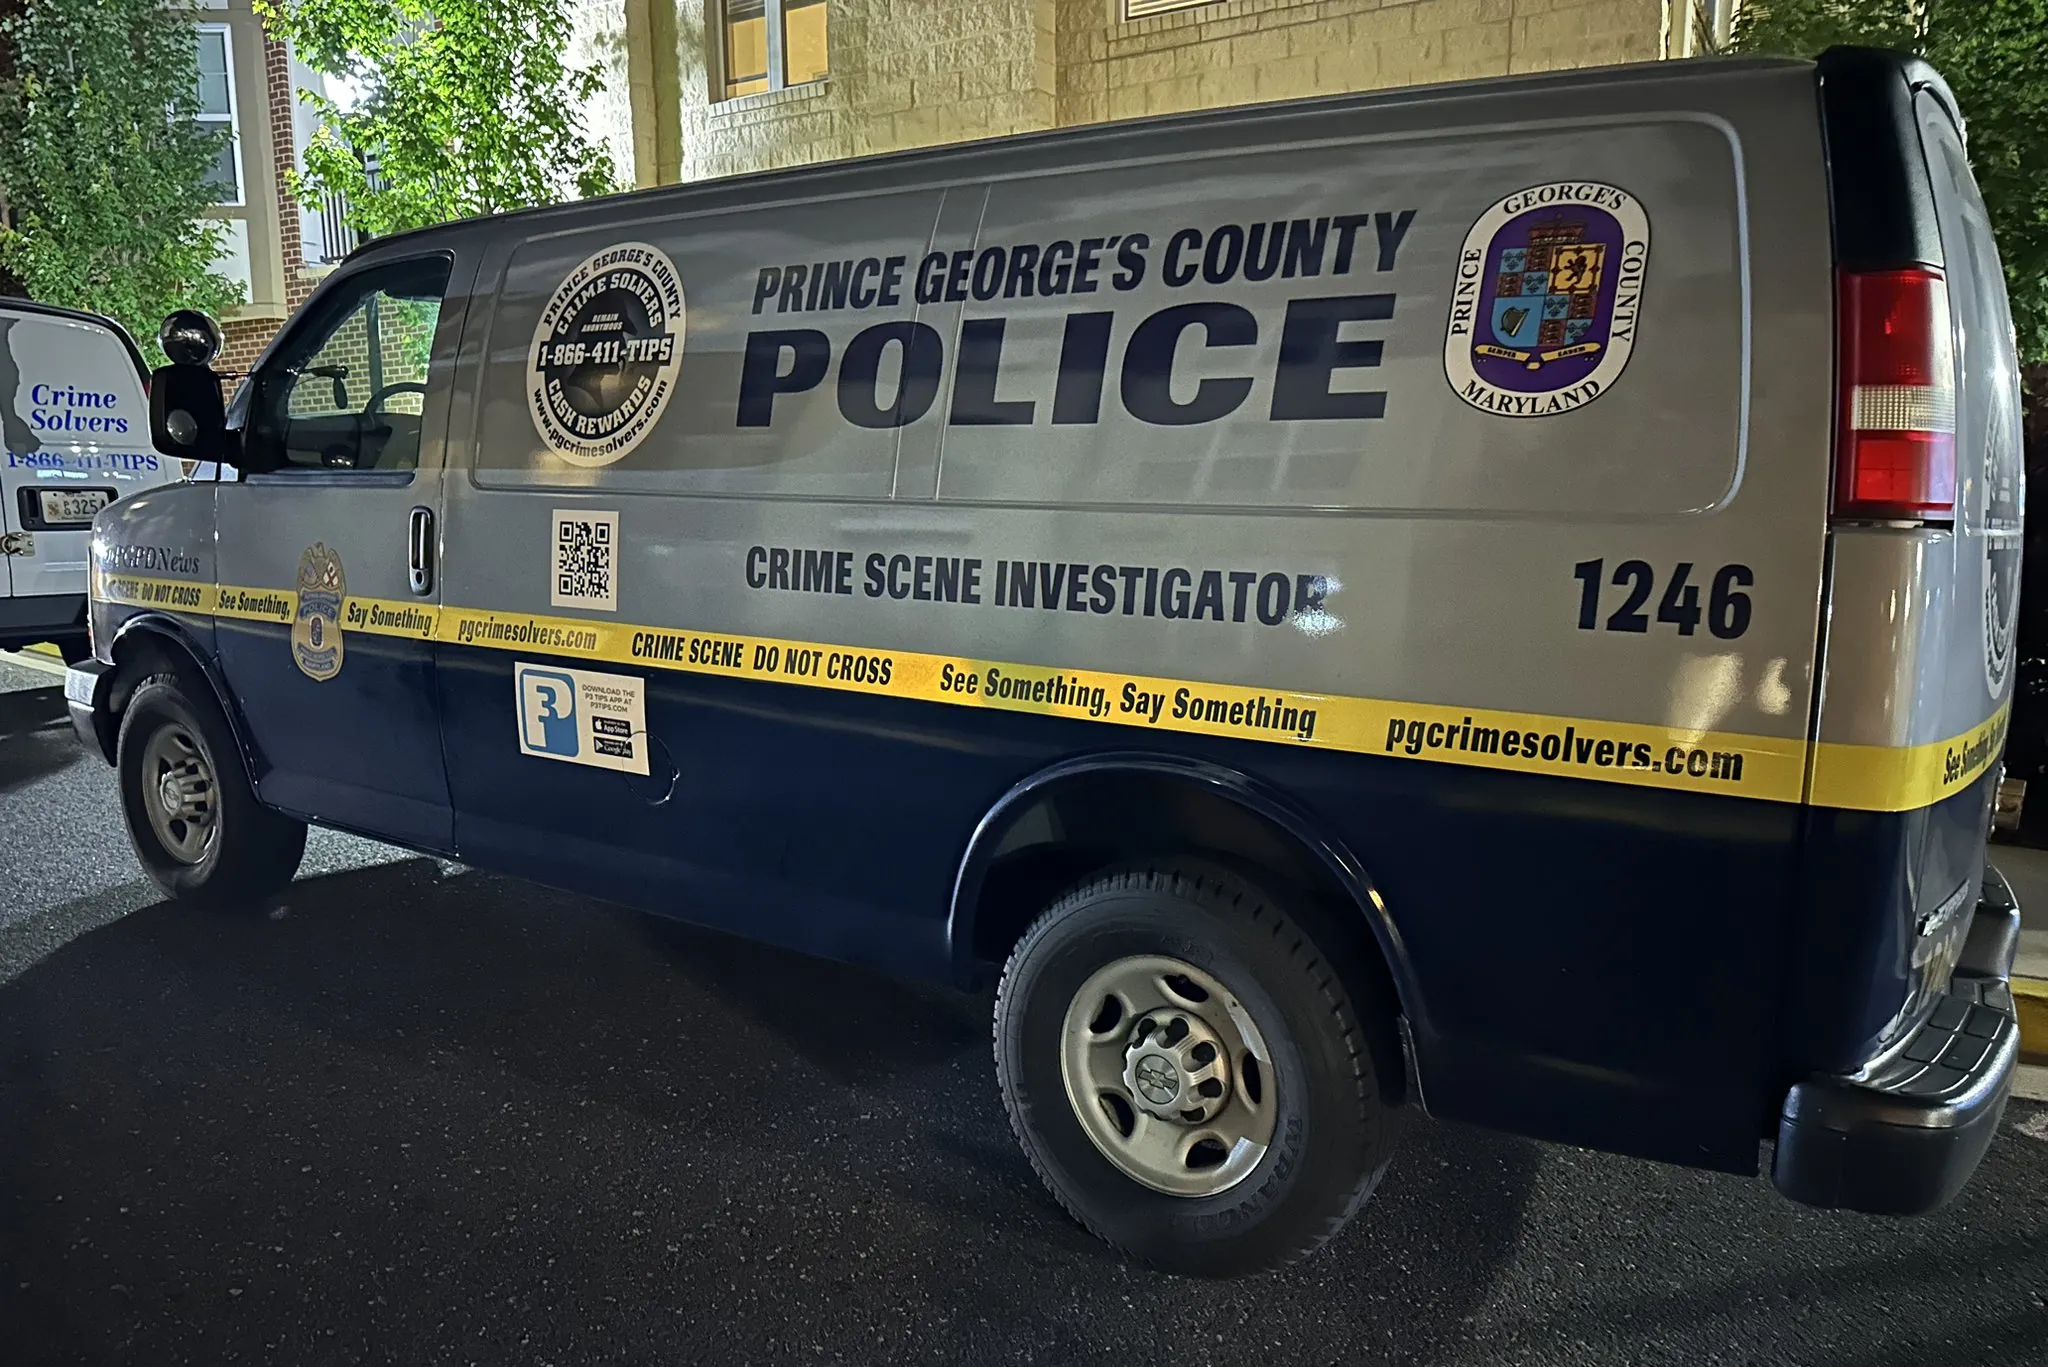 Police Arrest Teen for Killing Relative in Prince George’s County